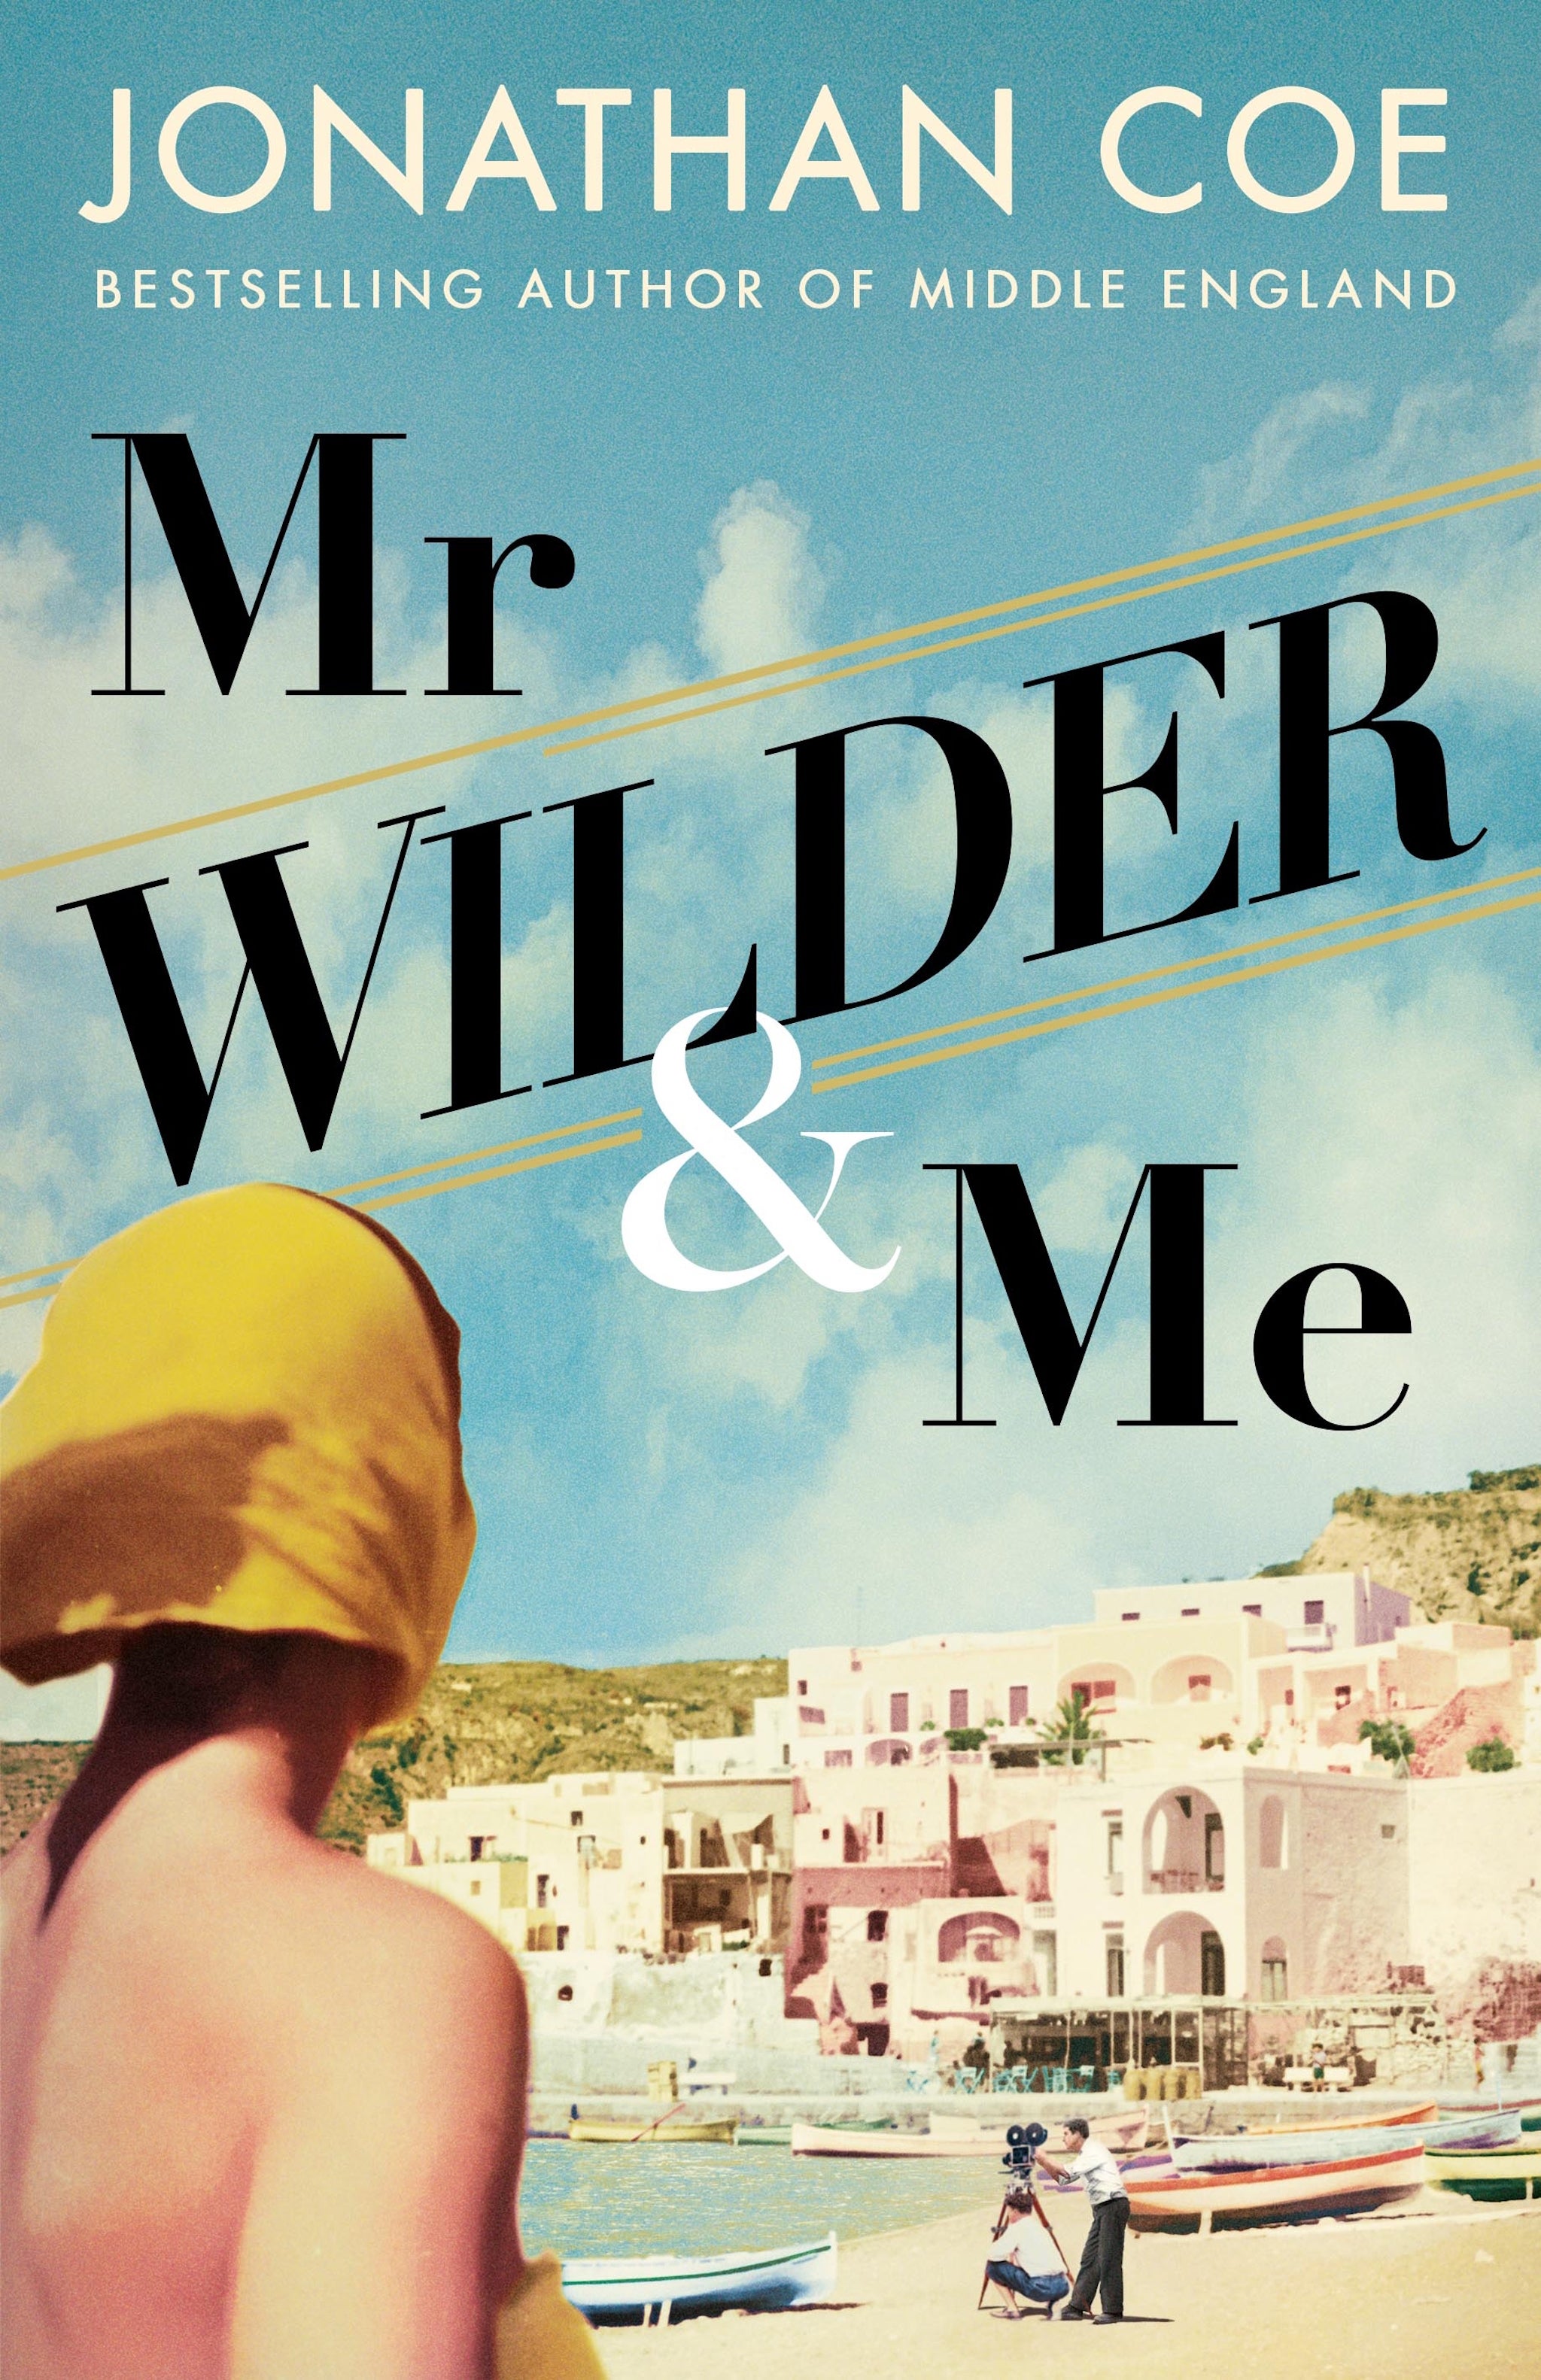 At the heart of this enchanting book’s success is how Coe brings Wilder gloriously to life